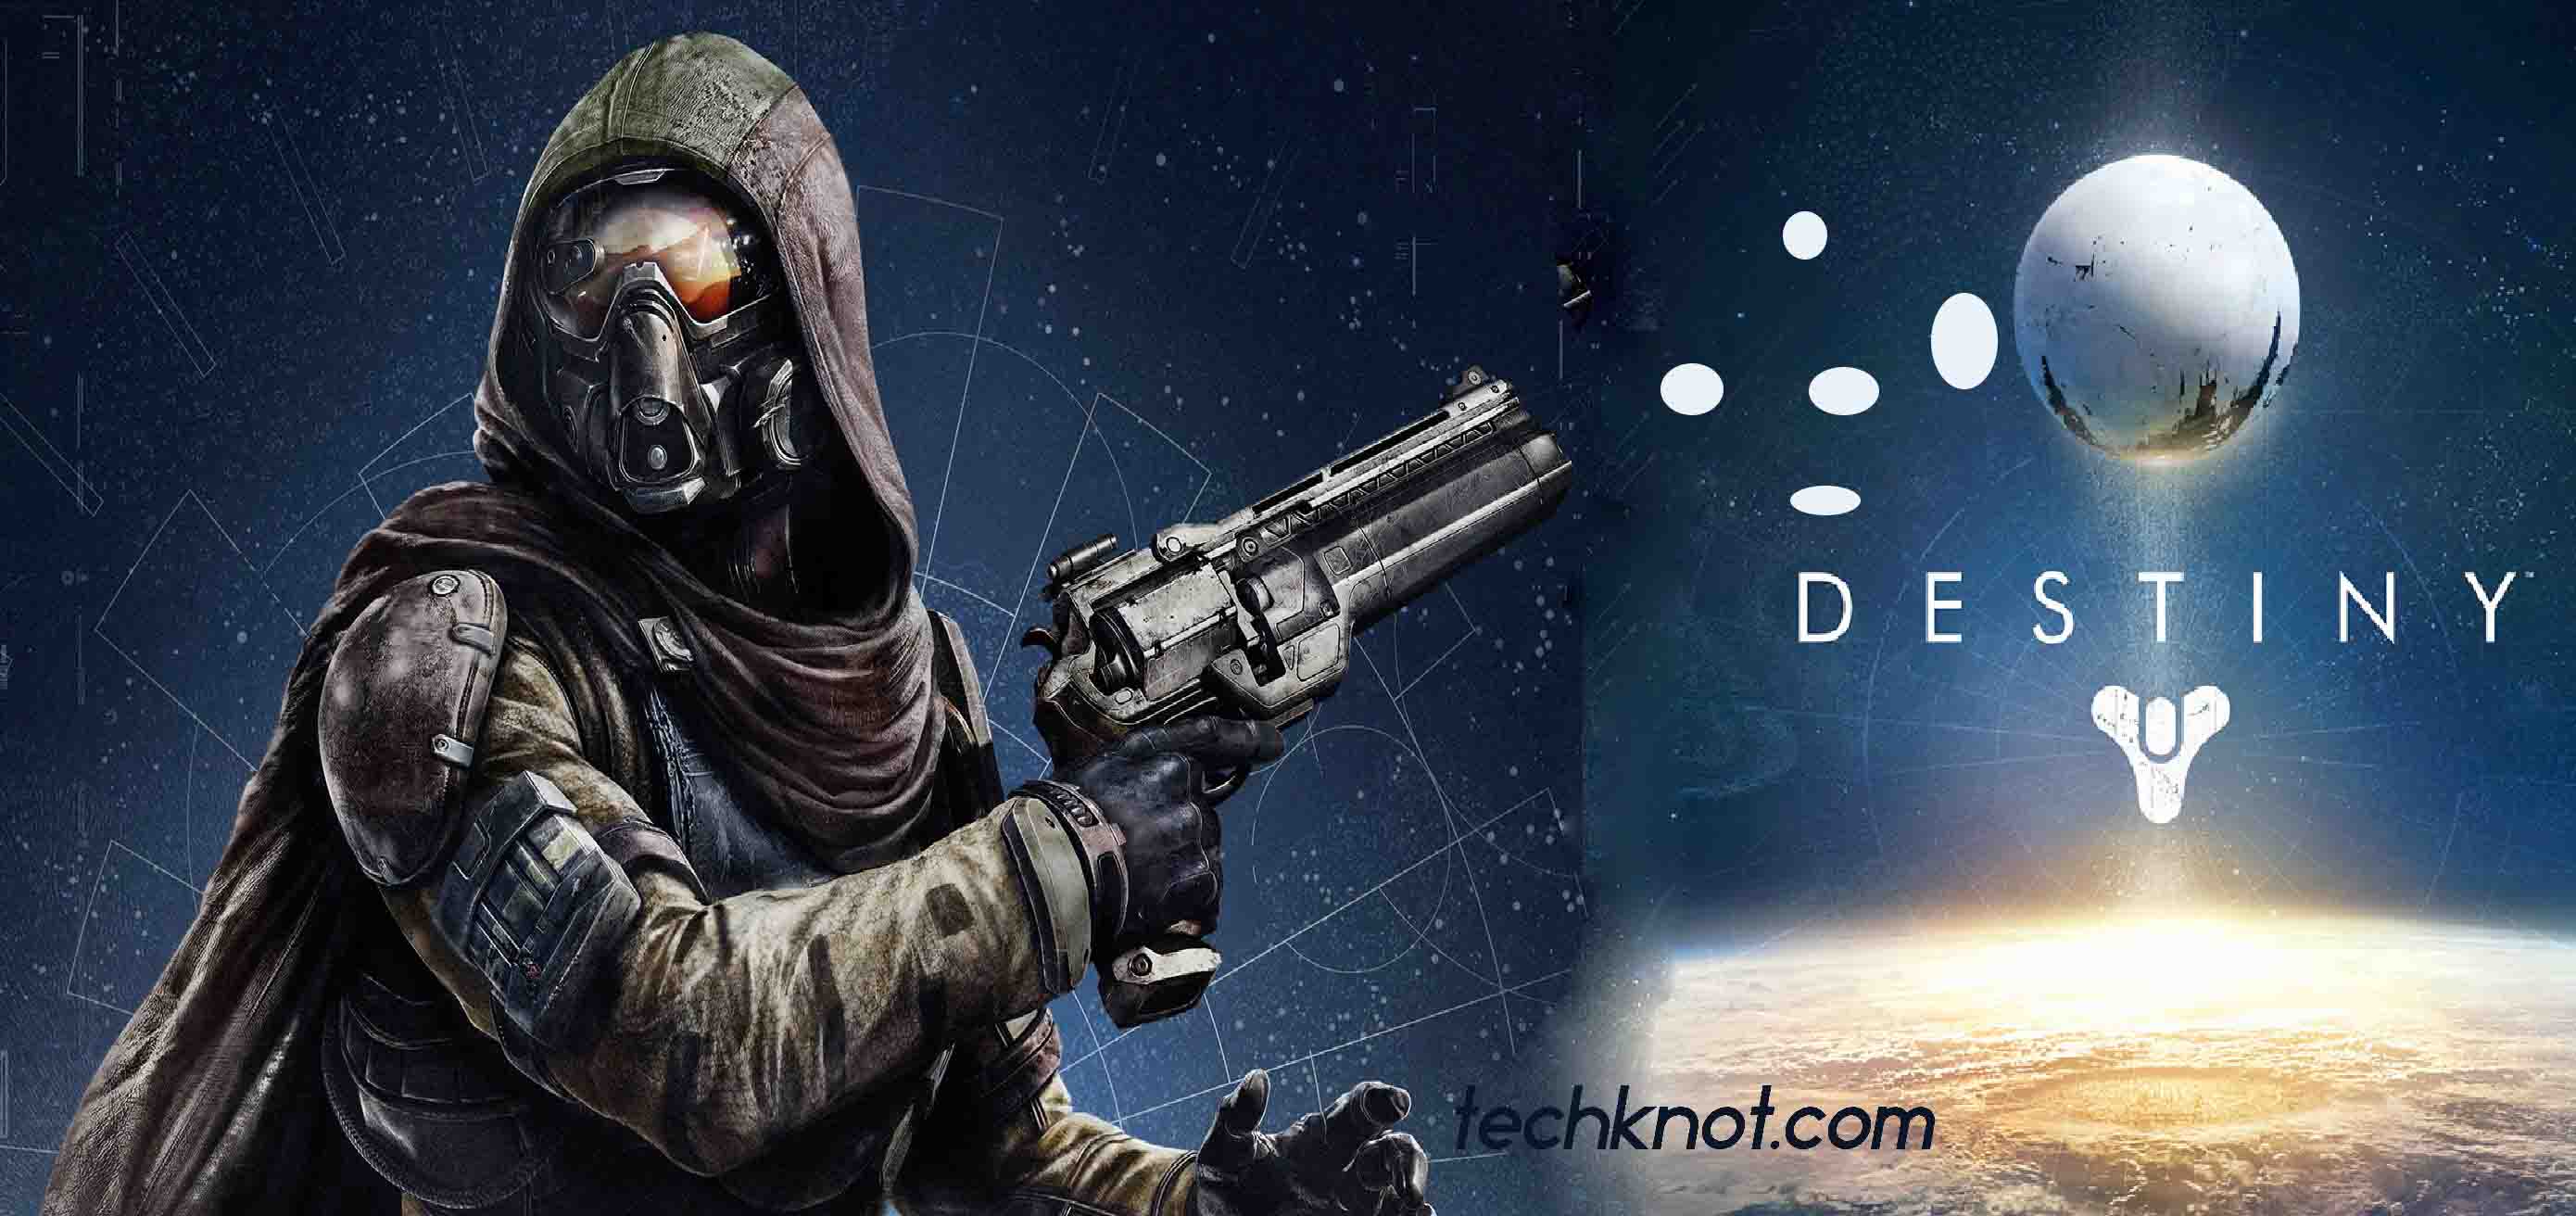 Destiny Hunter HD Wallpaper What Online Gamers Should Look Forward To